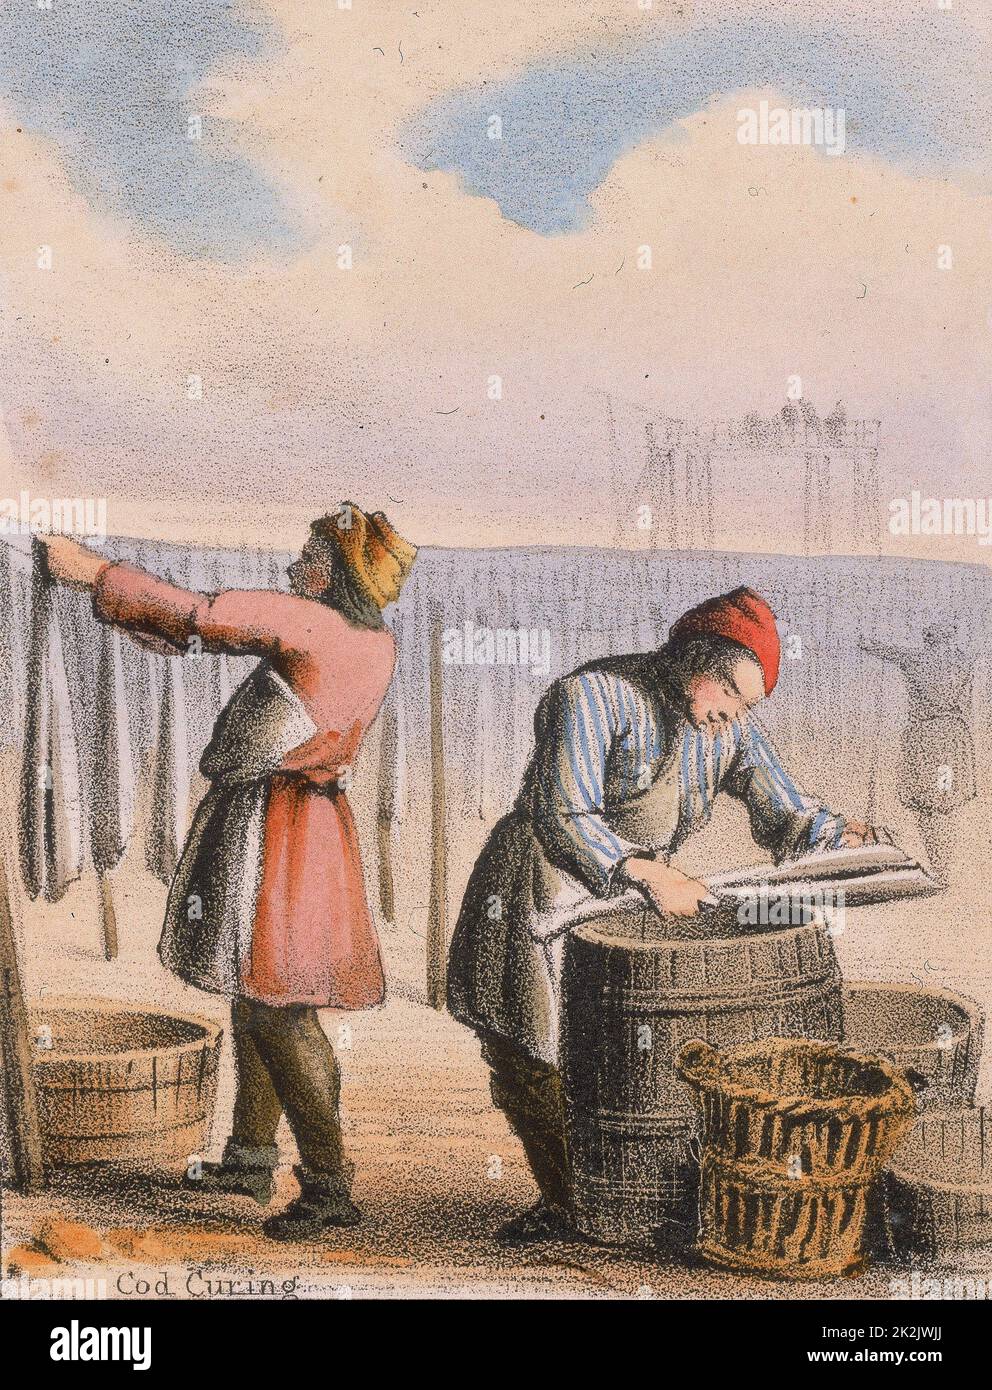 Curing cod by salting and hanging up to dry. From 'Graphic Illustrations of Animals and Their Utility to Man', c1850 Stock Photo